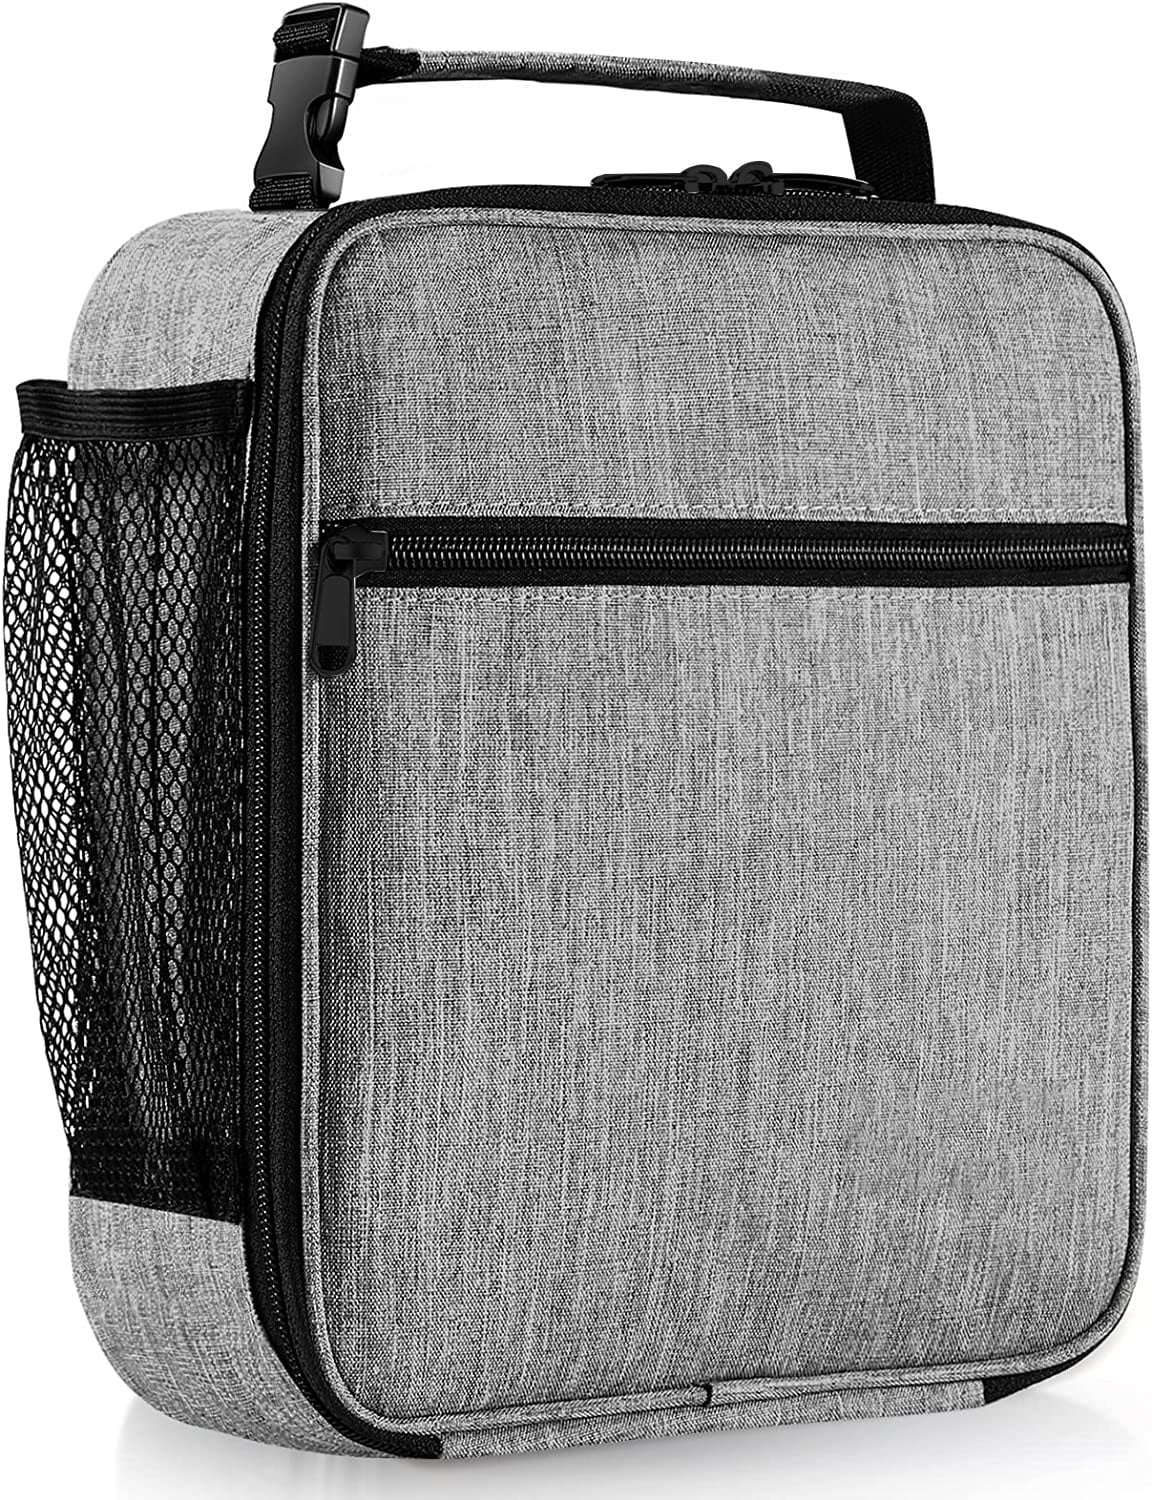 Insulated Lunch Box For Men - Meal Prep Lunch Bag Women/Men. Small Cooler  Bag Includes 4 Lunch Conta…See more Insulated Lunch Box For Men - Meal Prep